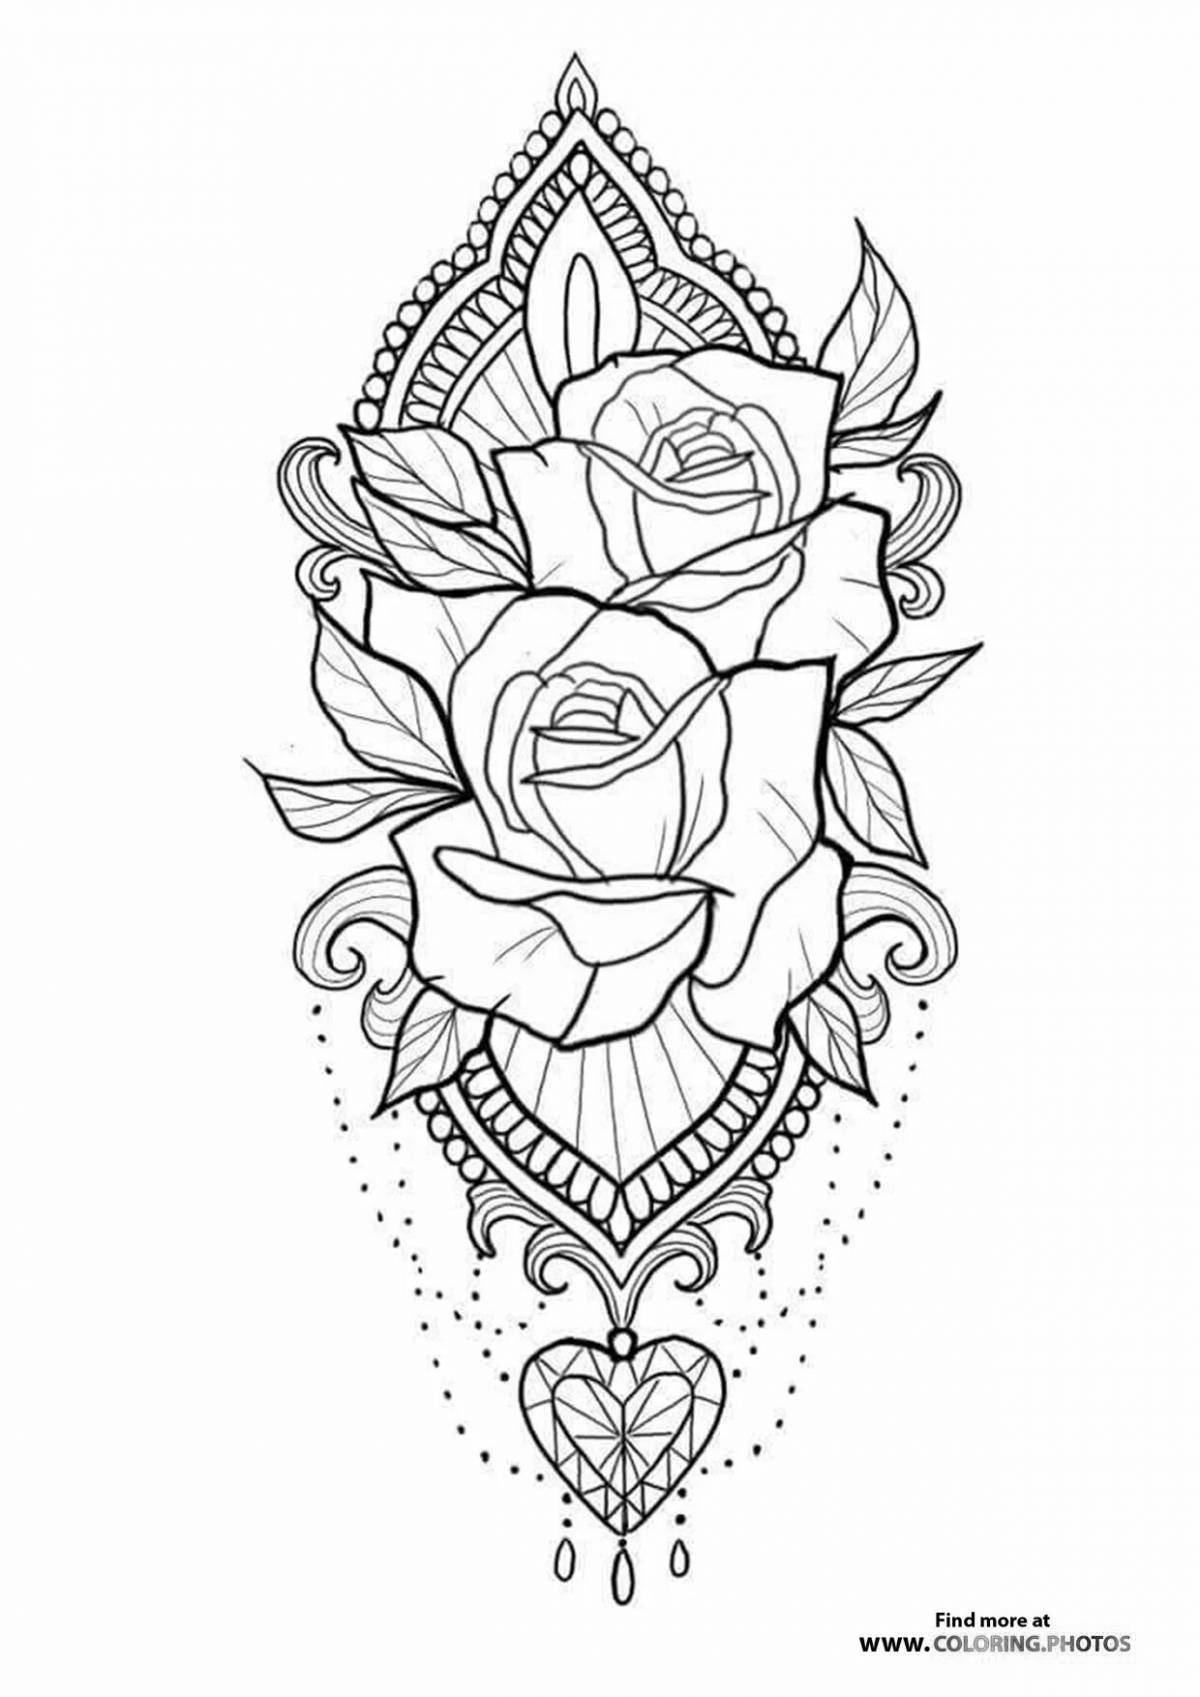 Impressive tattoo coloring pages